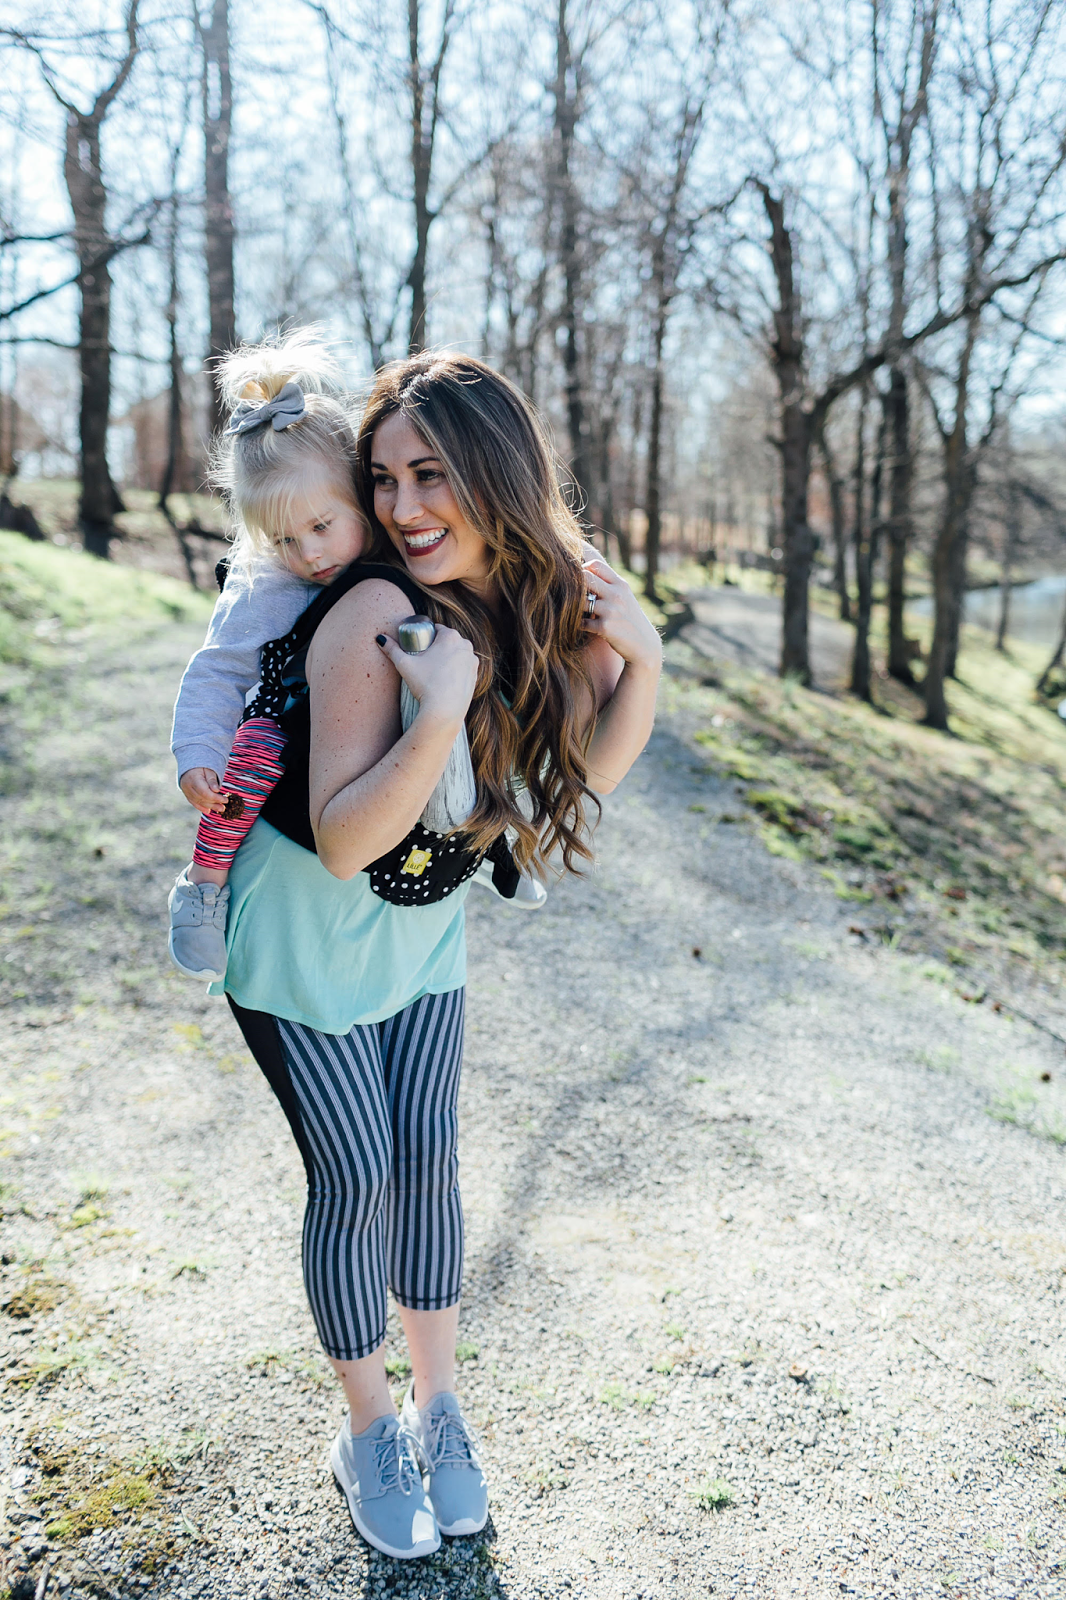 How To Workout With Kids by Walking in Memphis in High Heels: Babywearing